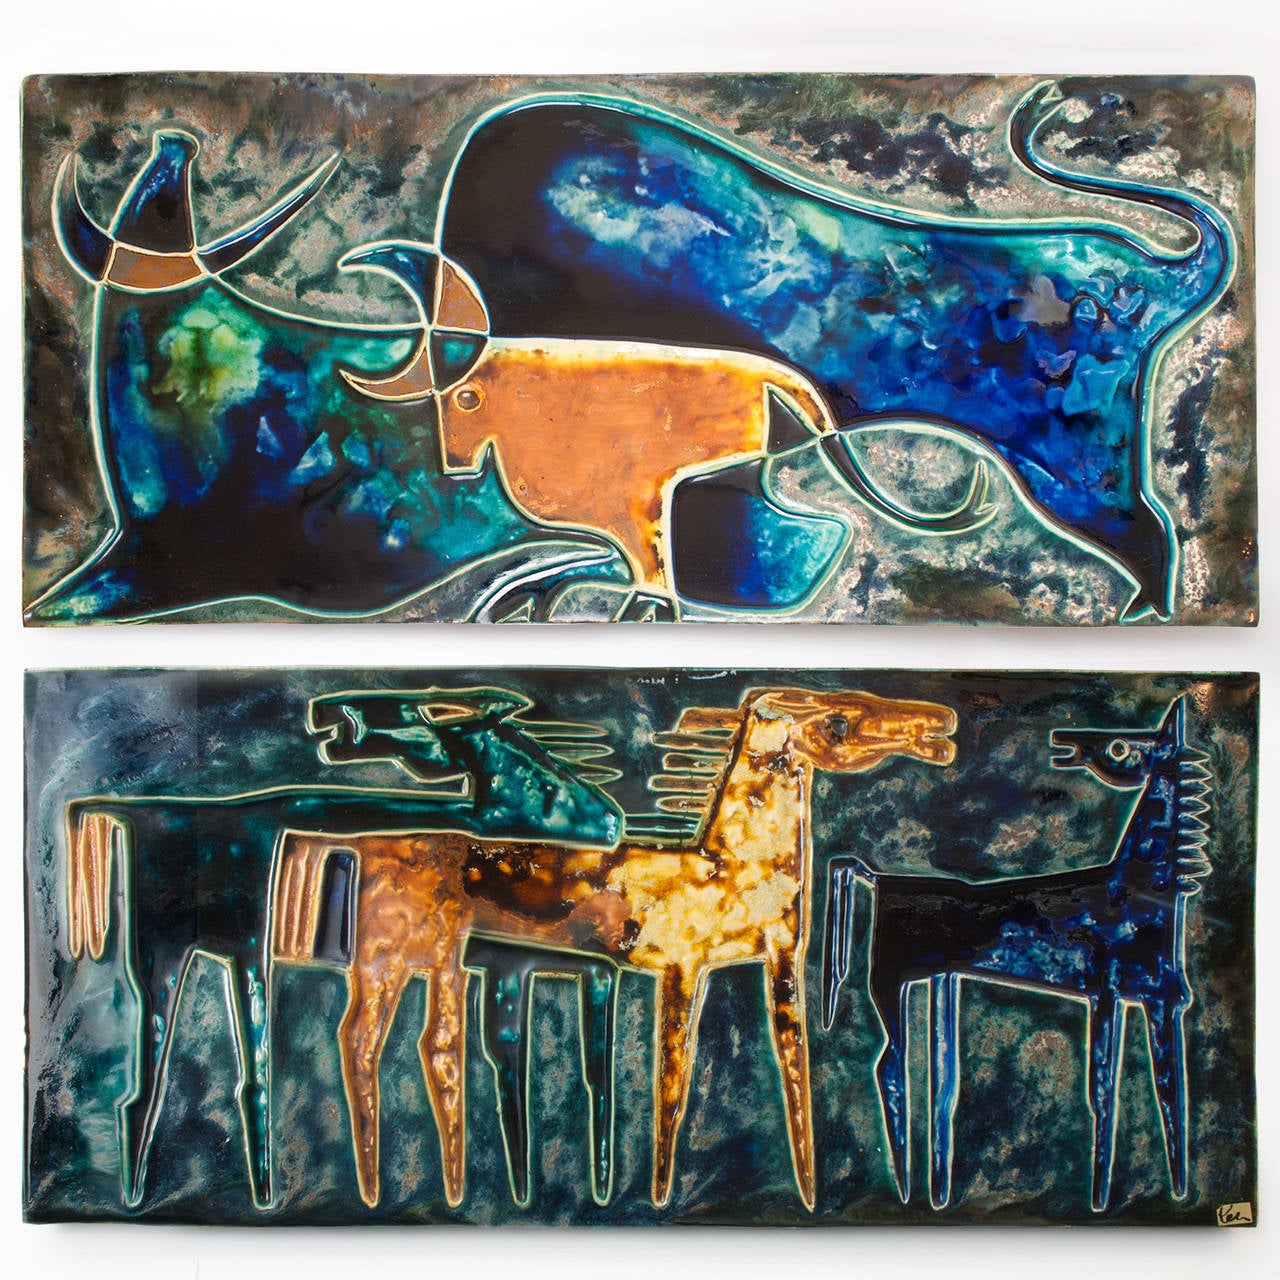 Two large midcentury ceramic wall reliefs by artist Helmut Schäffenacker. One relief depicts three horses, the other is more abstract and has two bulls. Beautifully glazed with jewel like colors. A hanging mechanism is built into each panel.